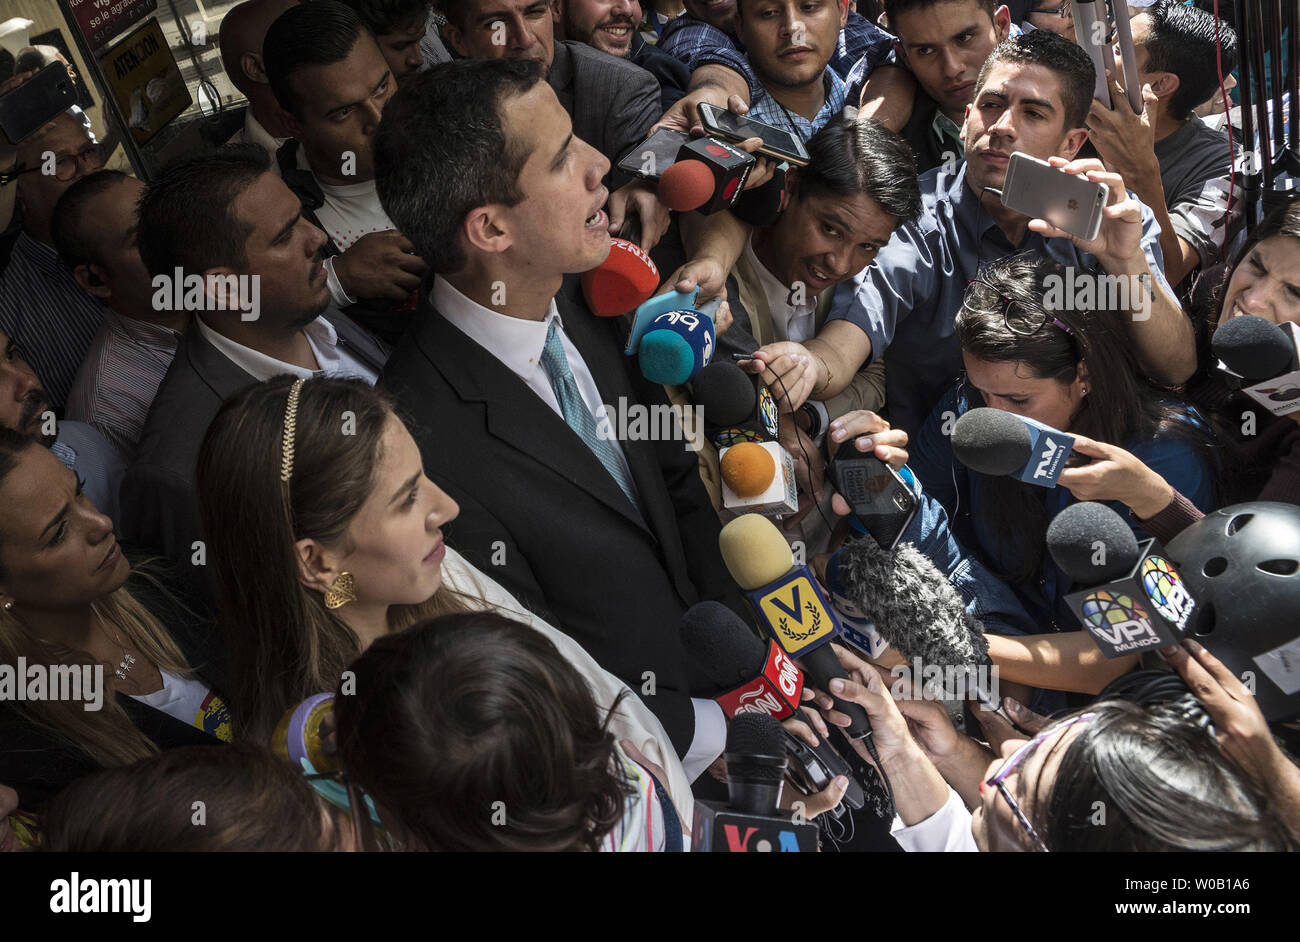 Opposition leader and self-proclaimed 'acting president' Juan Guaido (C) talks to the press as he holds his daughter Miranda, next to his wife Fabiana Rosales (L), outside his home in Santa Fe, Caracas on January 31, 2019. Venezuela's opposition leader Juan Guaido was to outline his plans to tackle the country's economic crisis Thursday after European lawmakers recognized him as the acting head of state -- another step forward in his bid to force out President Nicolas Maduro. photo by Marcelo Perez/ UPI Stock Photo